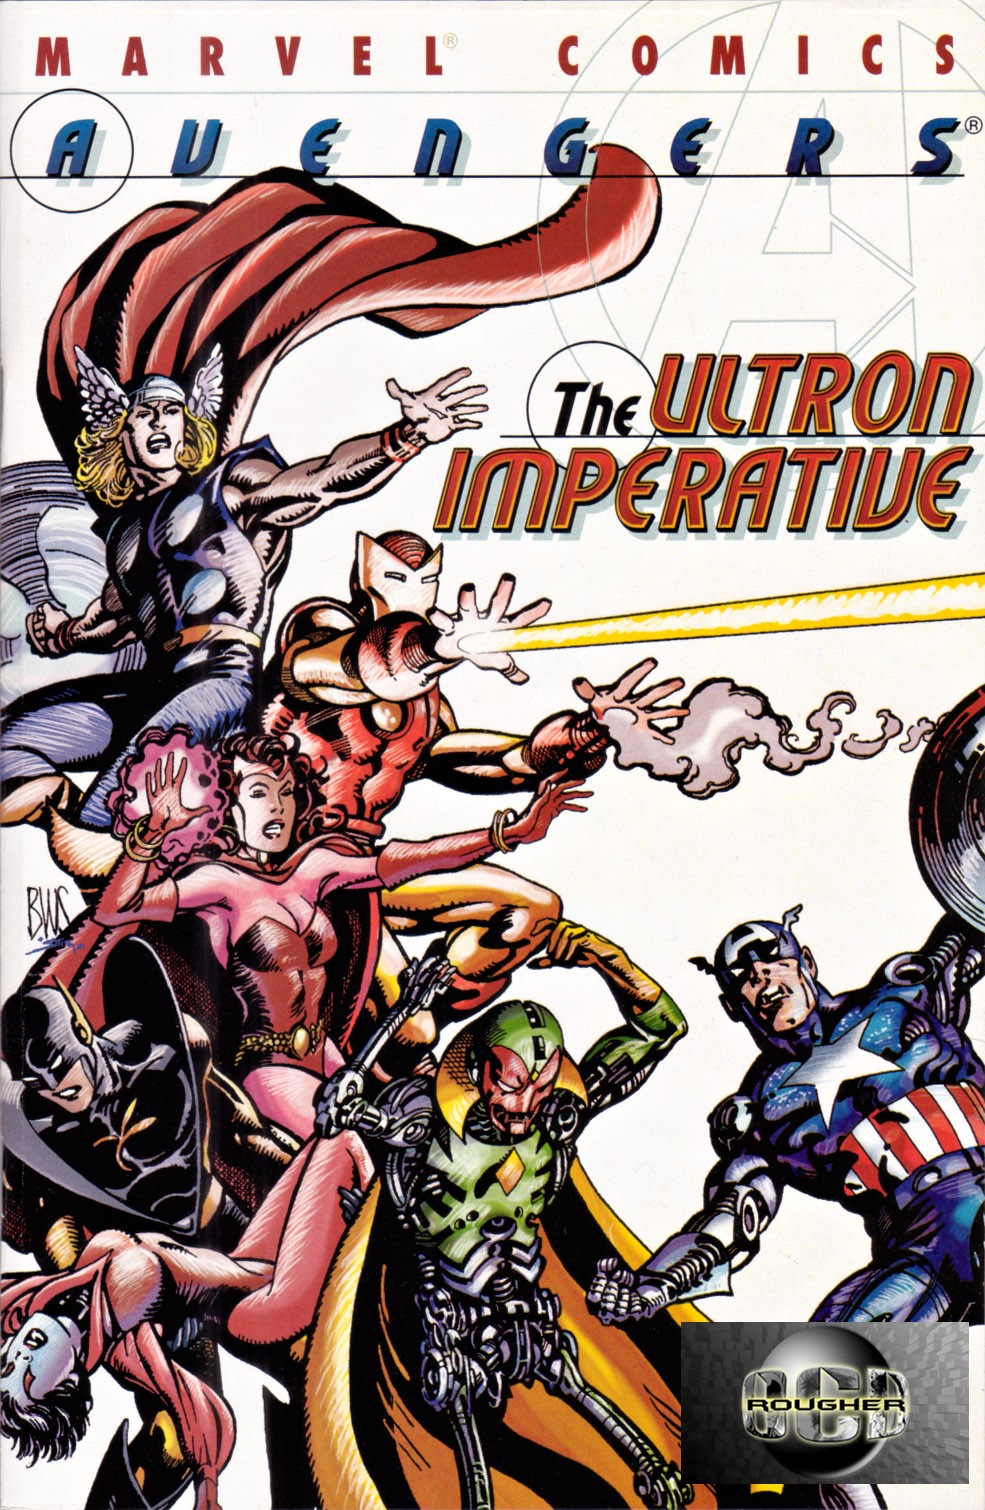 Avengers: The Ultron Imperative Vol. 1 #1